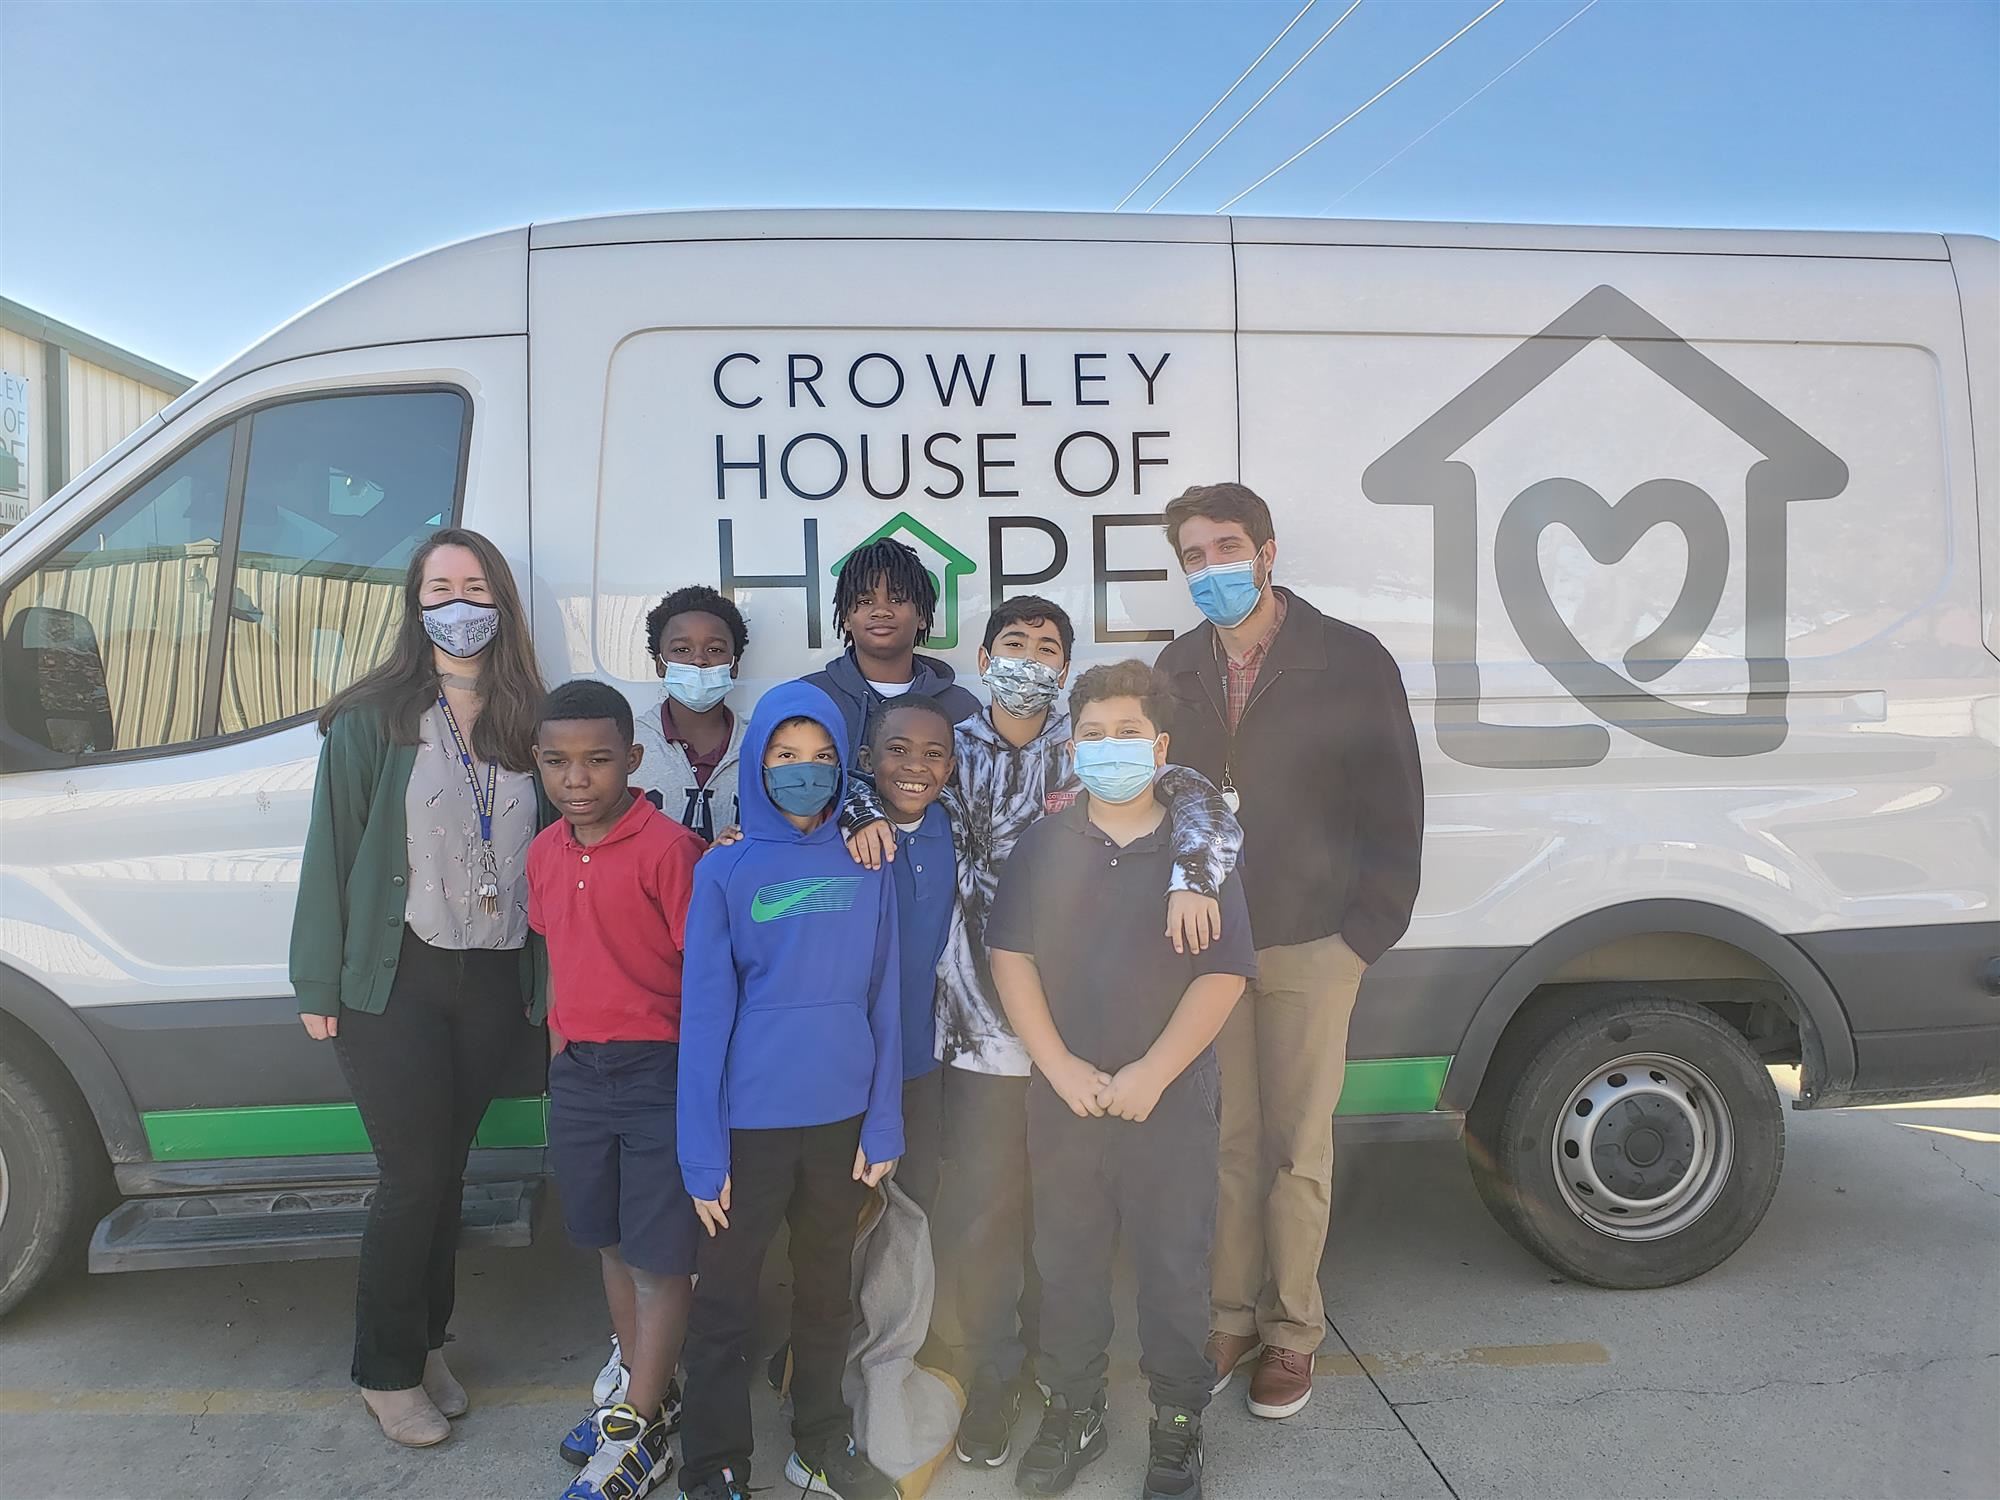 Sycamore Elementary students in front of a Crowley House of Hope Van